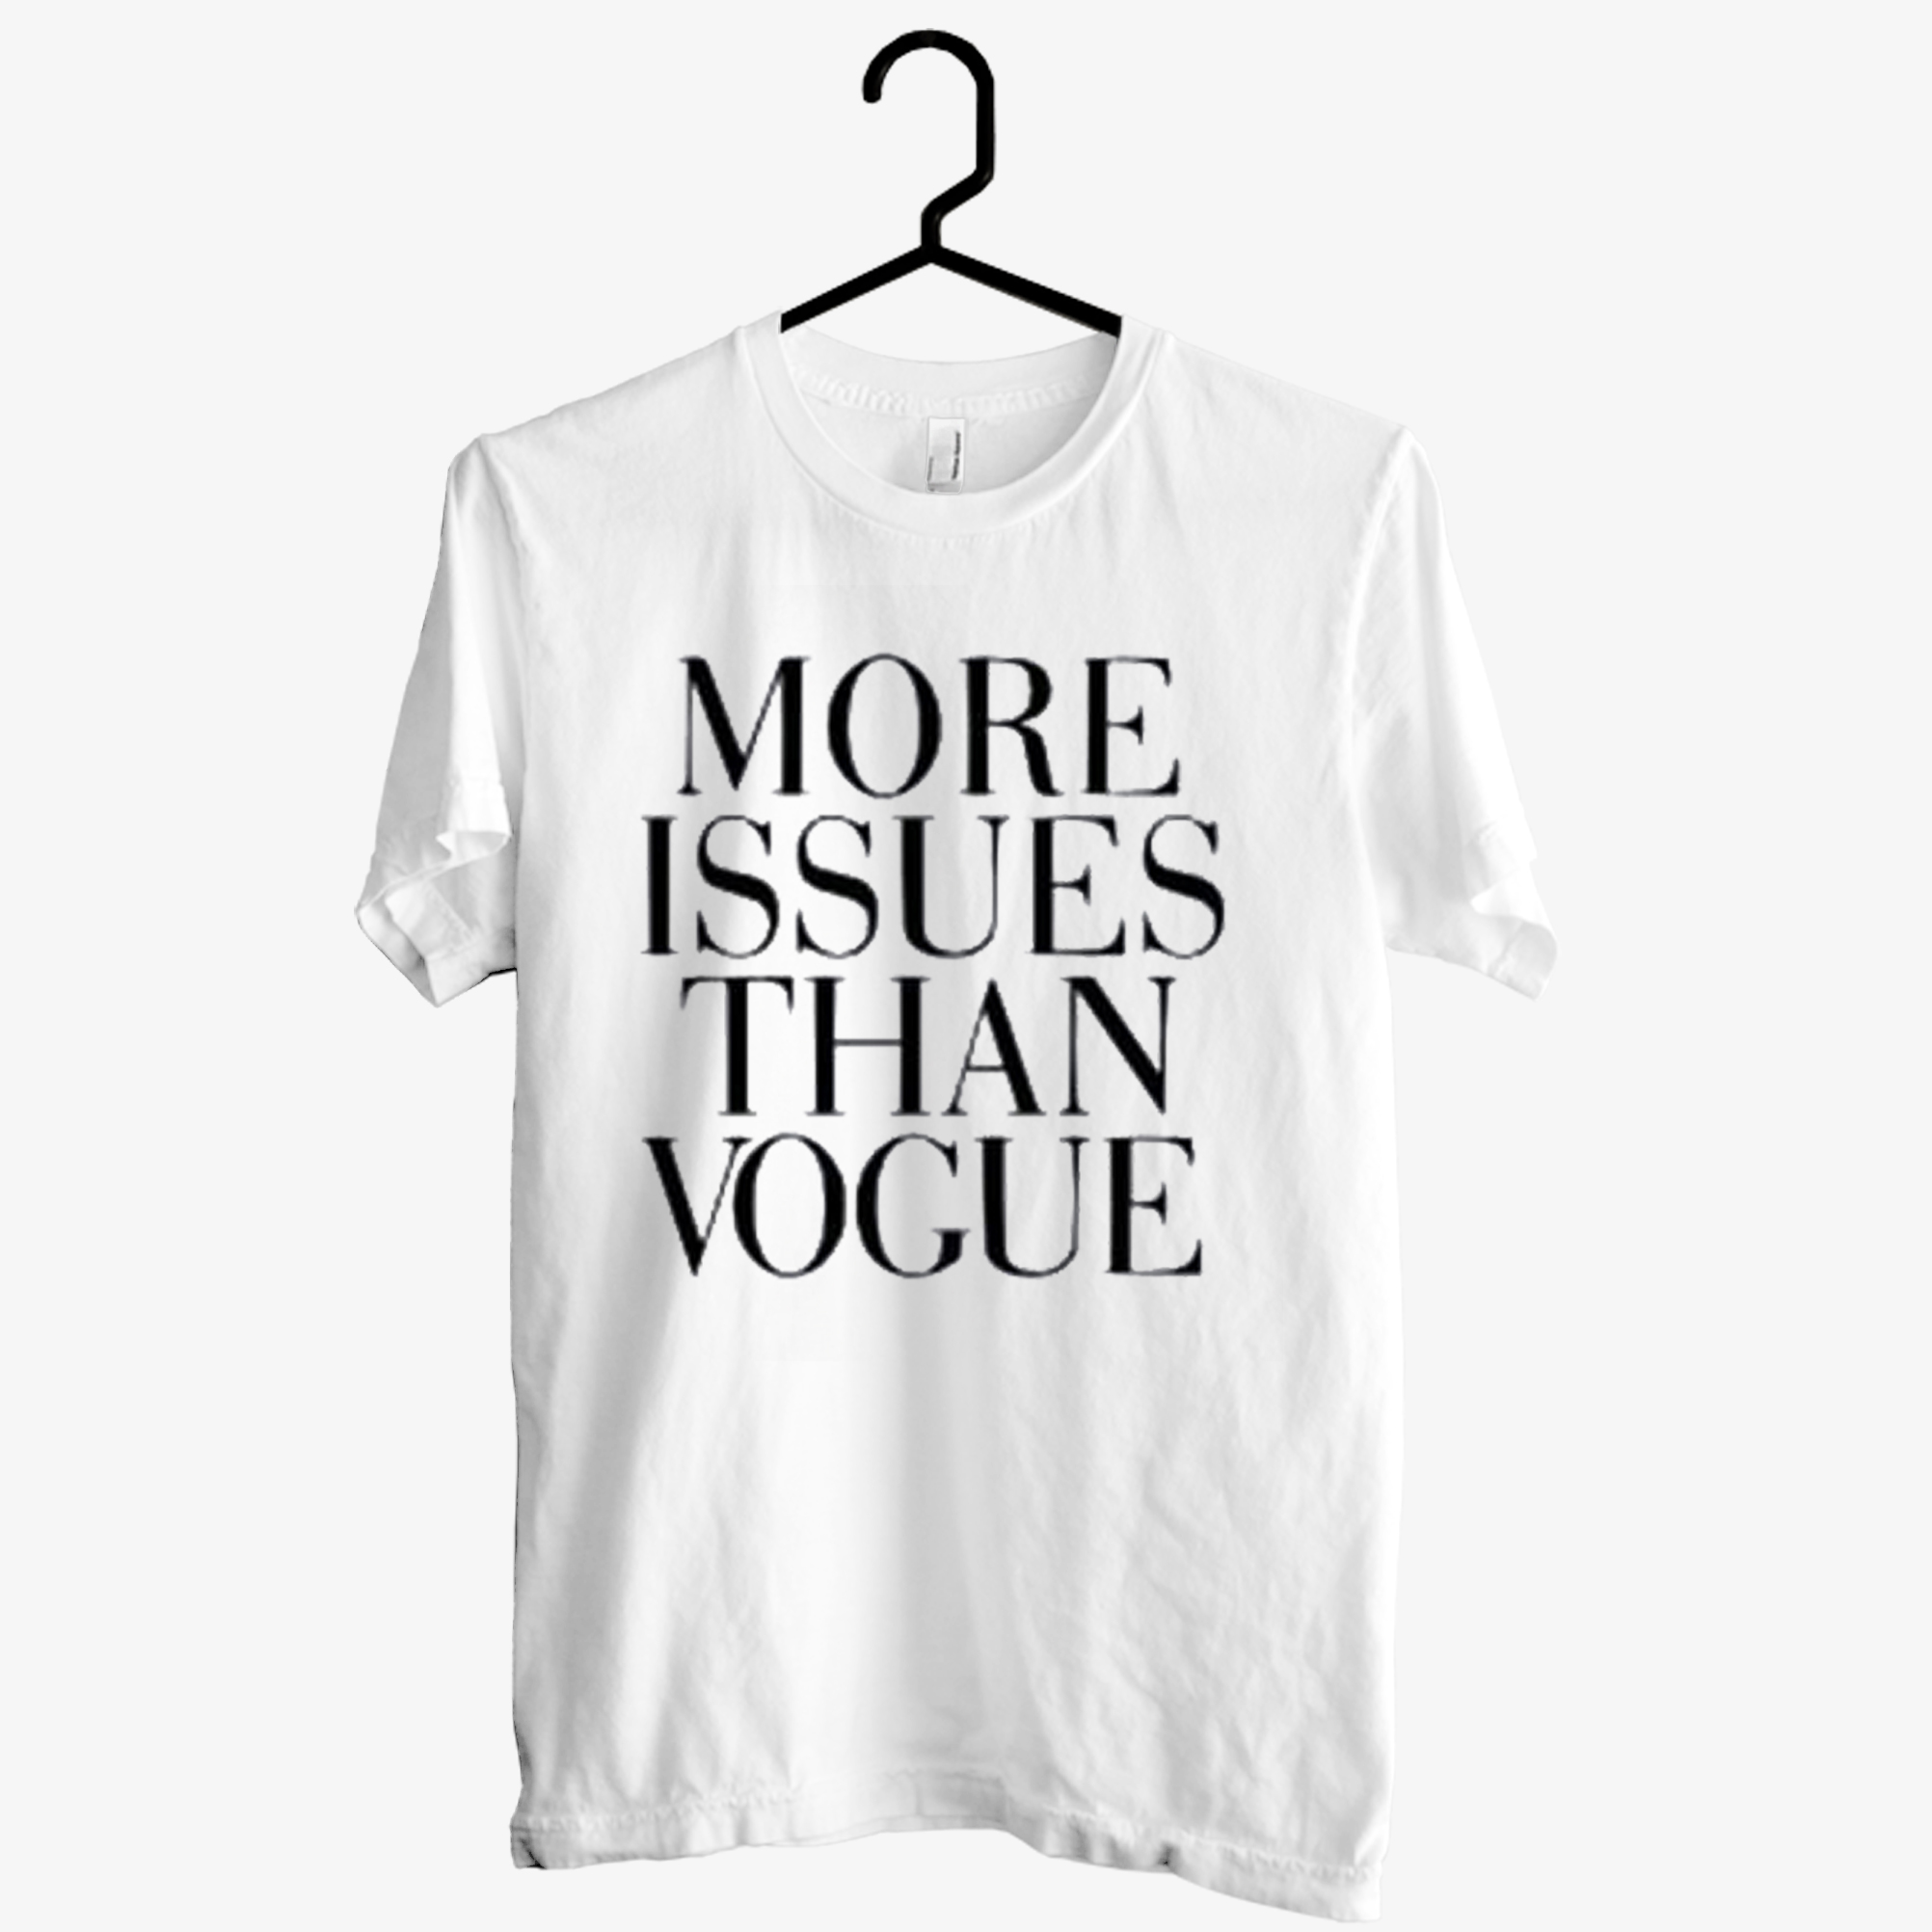 More Issues Than Vogue T shirt